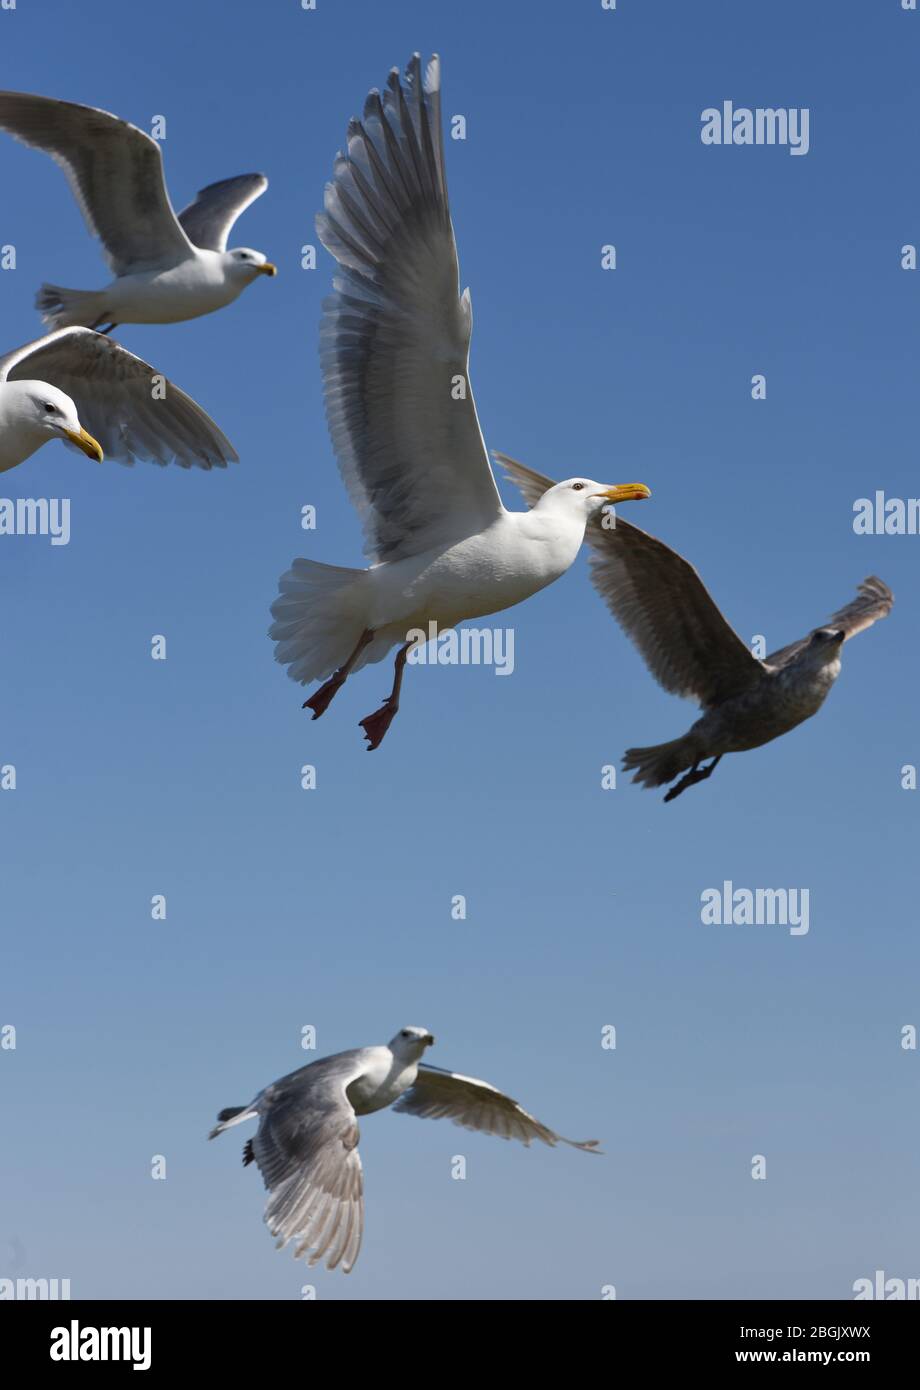 A group of sea gulls fly with wings spread out against a blue sky in Victoria, British Columbia, Canada on Vancouver Island Stock Photo